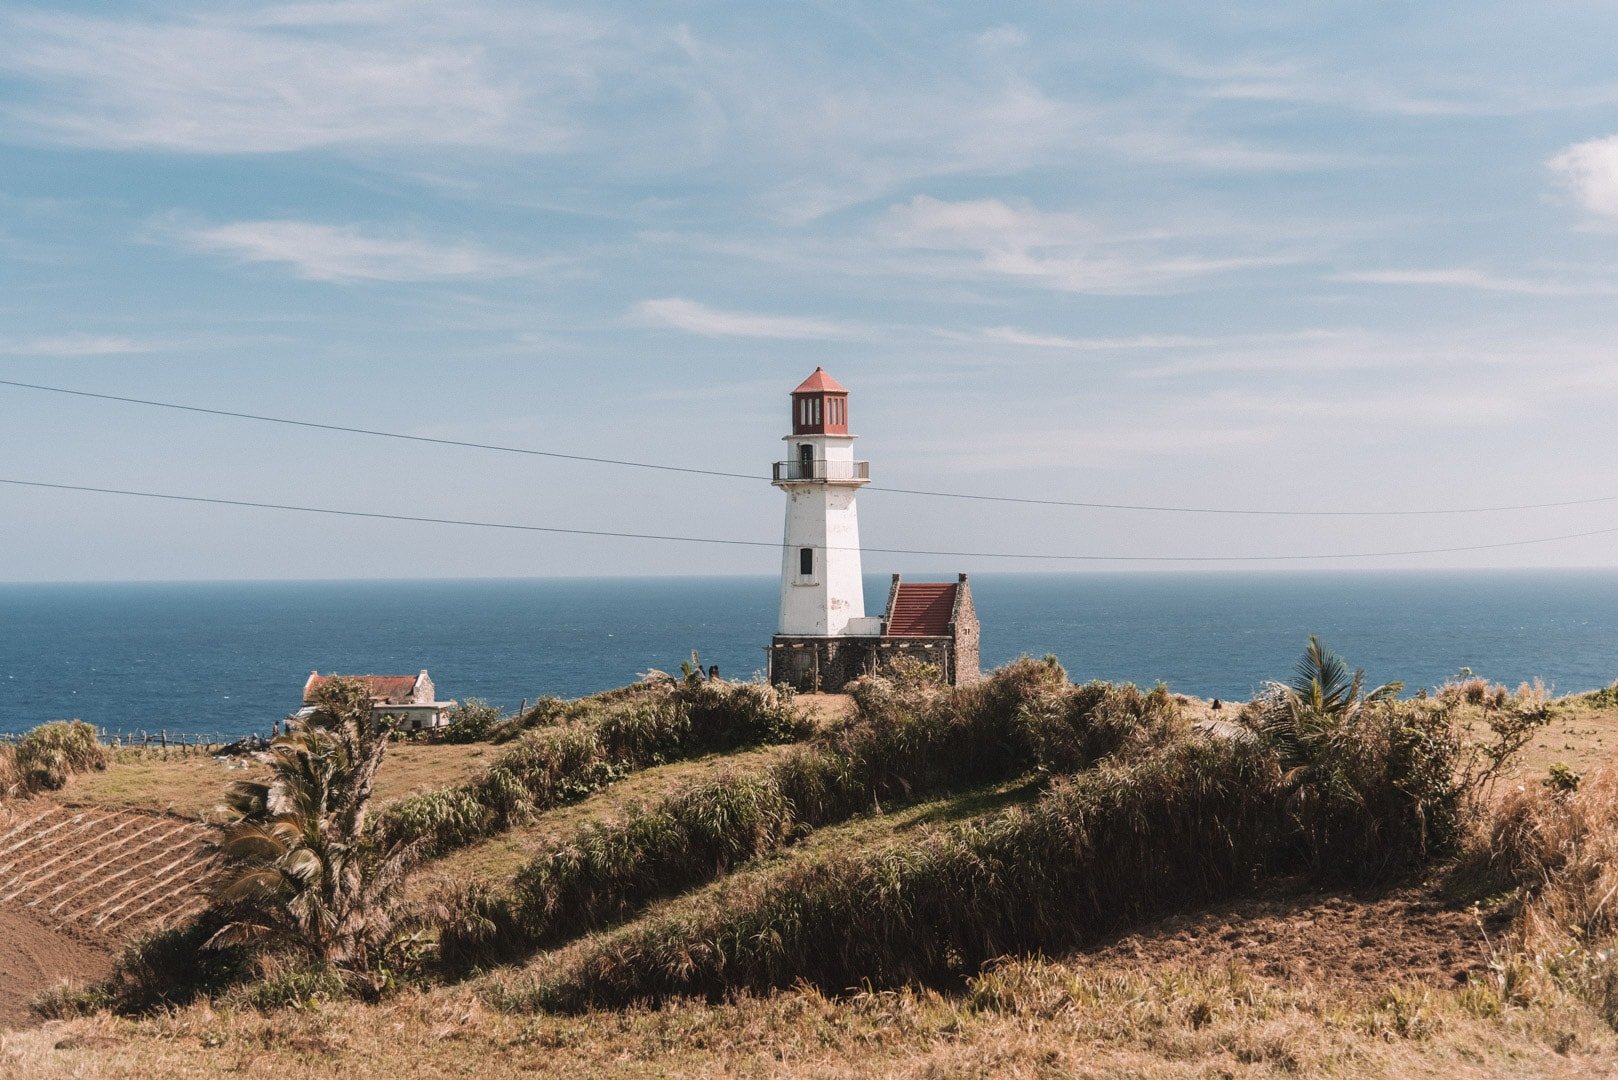 Transportation around Batanes, Batanes tourist spots, atms in batanes, wifi connection in batanes, how to go to Batanes, Tayid lighthouse